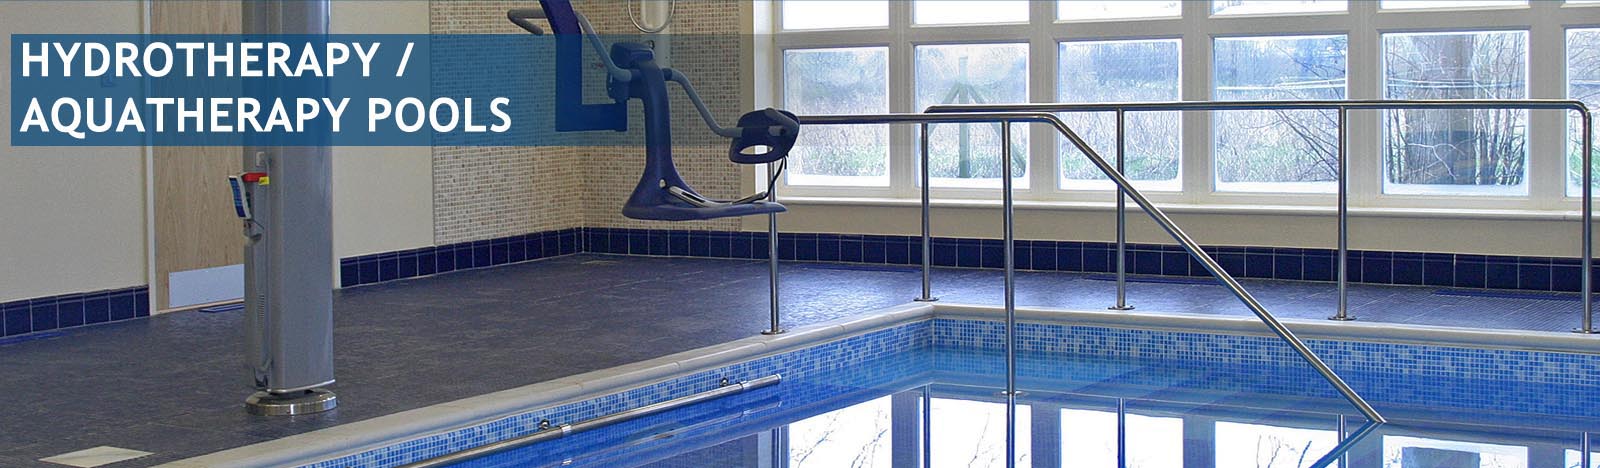 hydrotherapy pools london